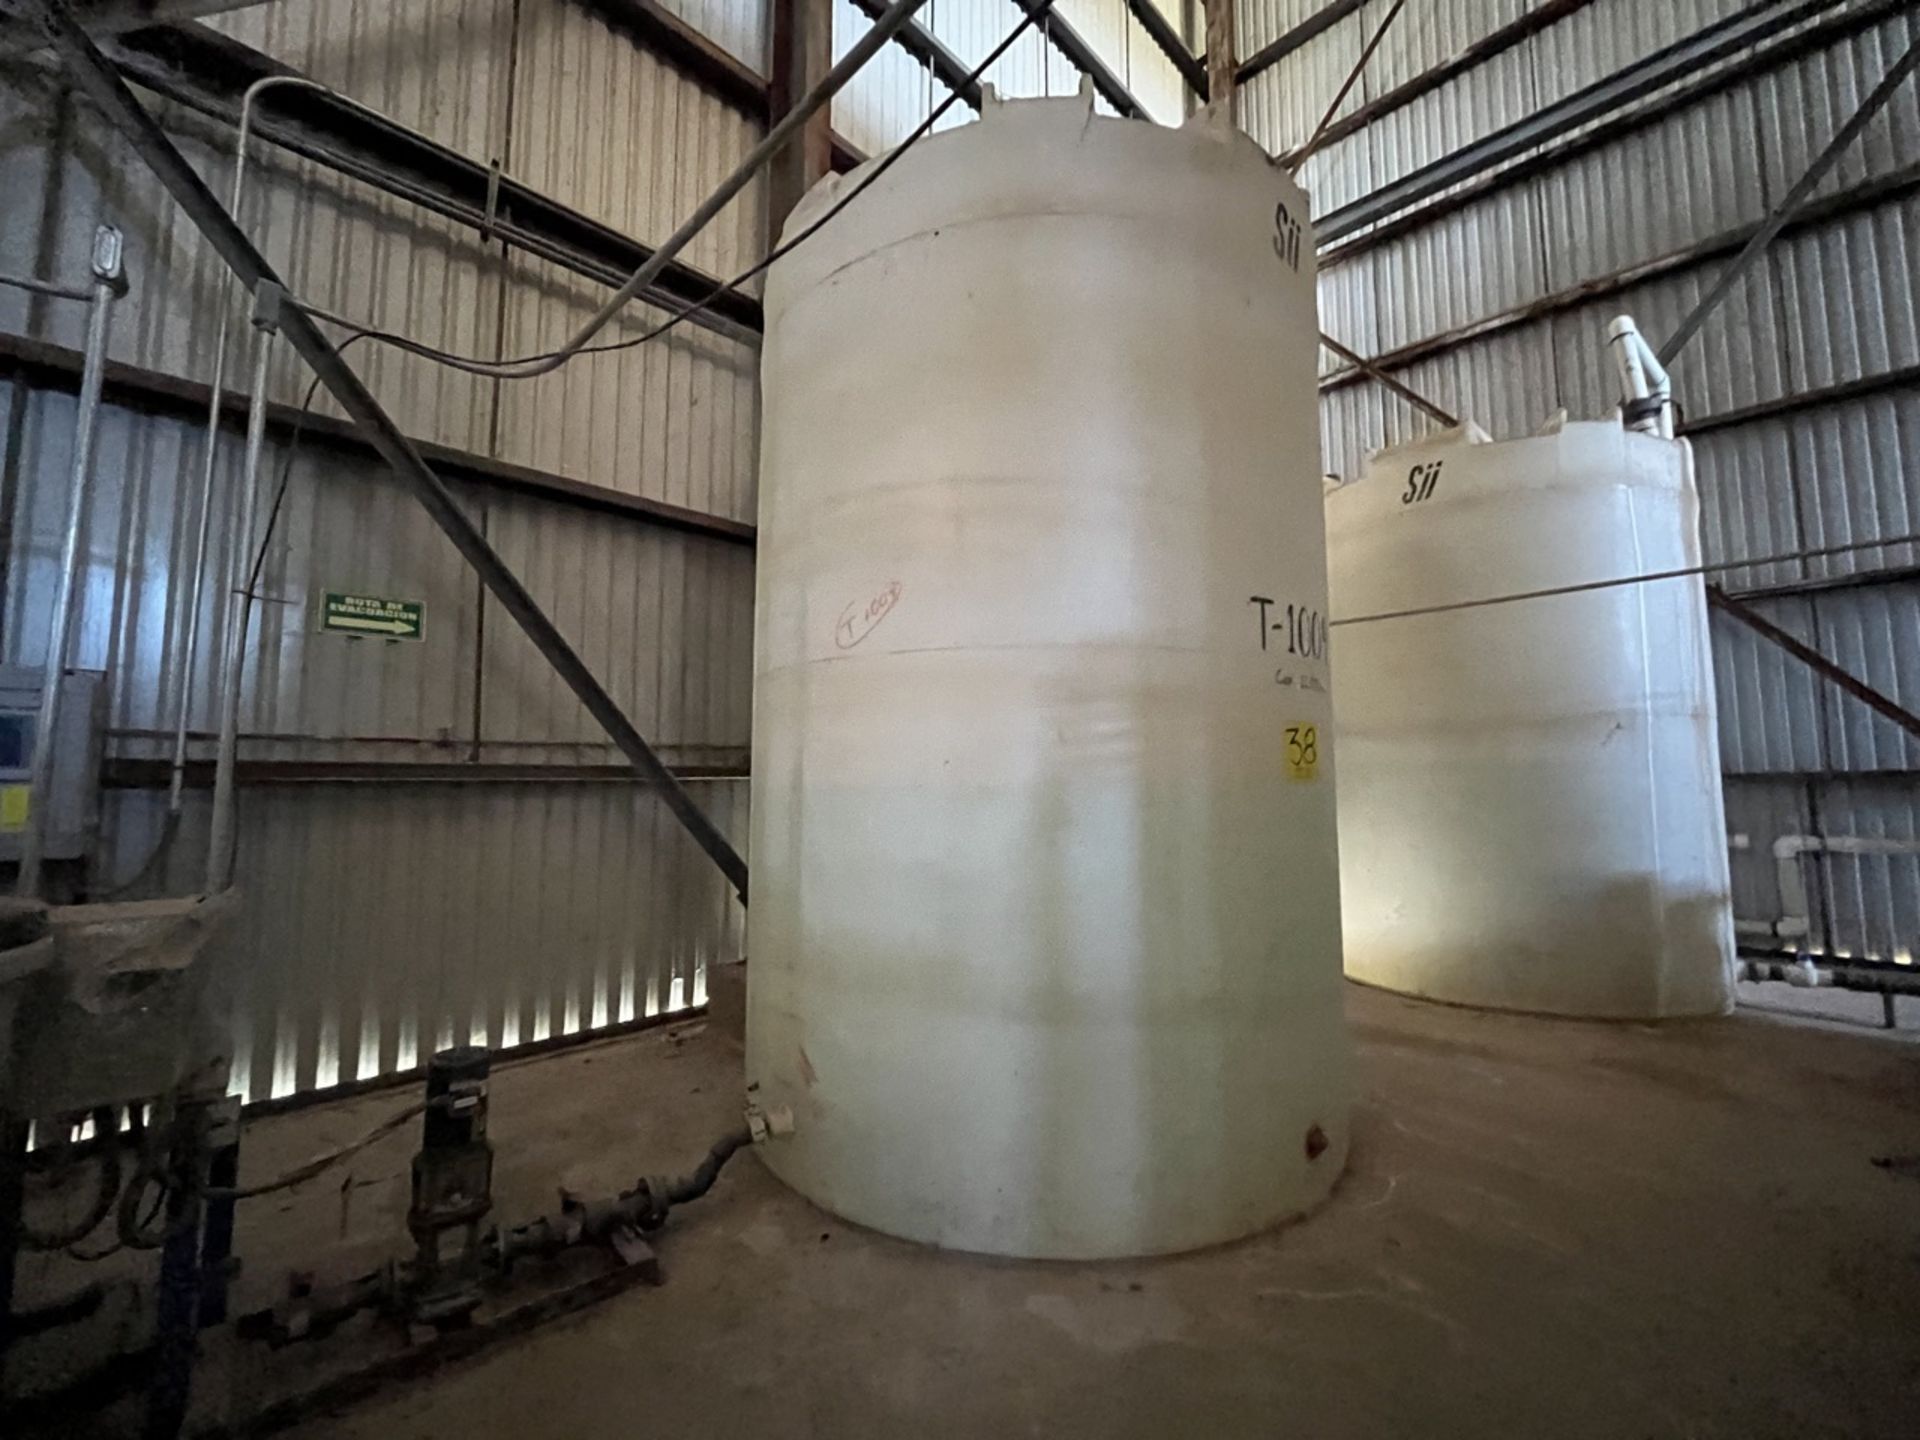 Plastic water storage tank with a capacity of 12,000 liters measuring approx 2.40 meters diameter x - Image 6 of 16